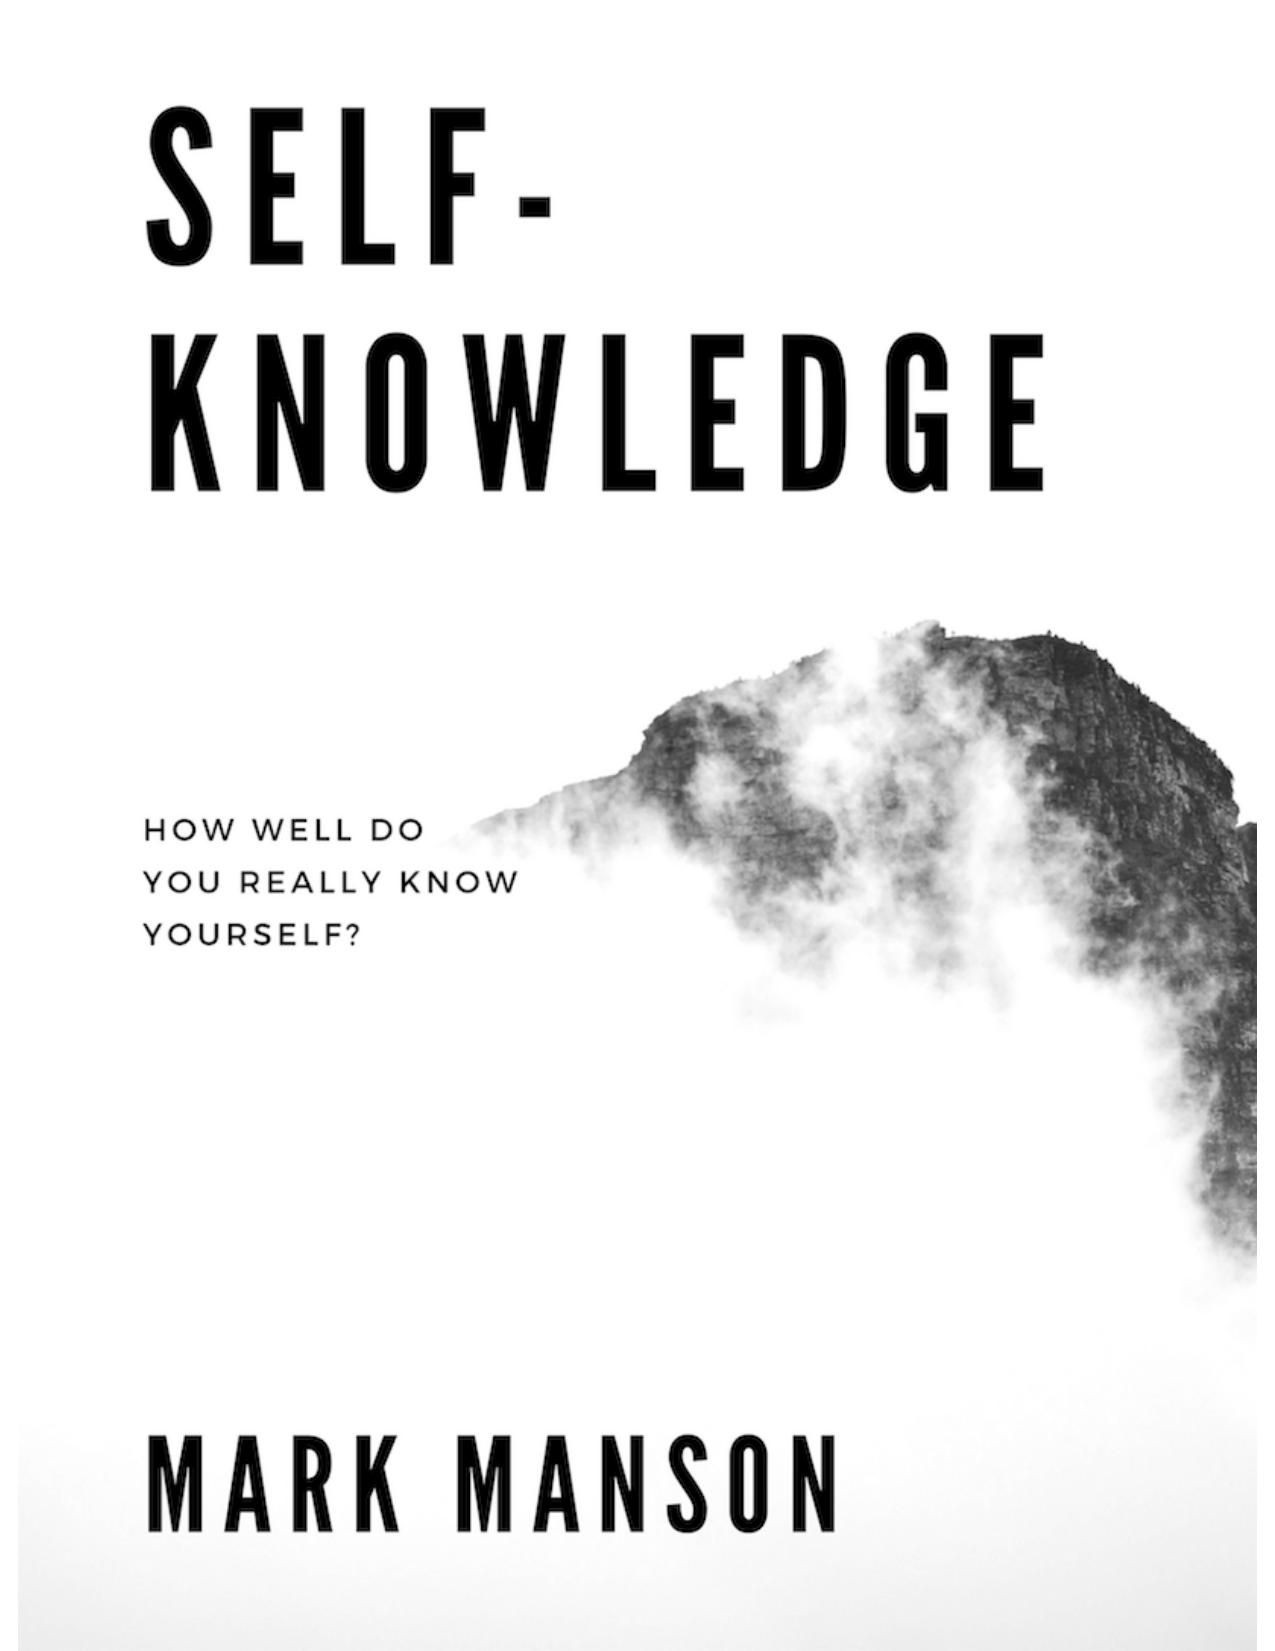 Self-Knowledge - How sell do you really know yourself?